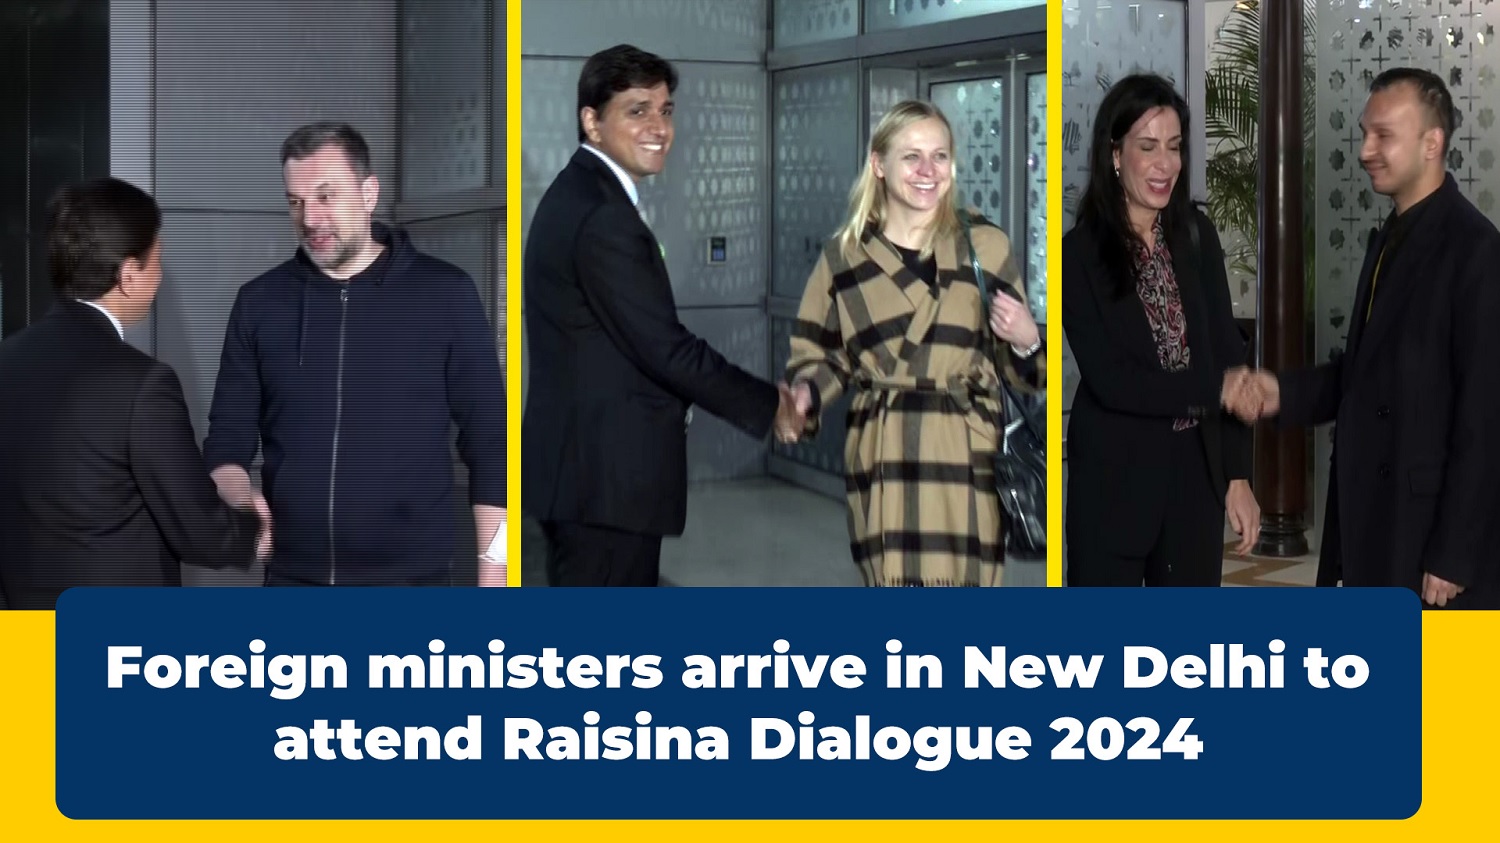 Foreign ministers arrive in New Delhi to attend Raisina Dialogue 2024